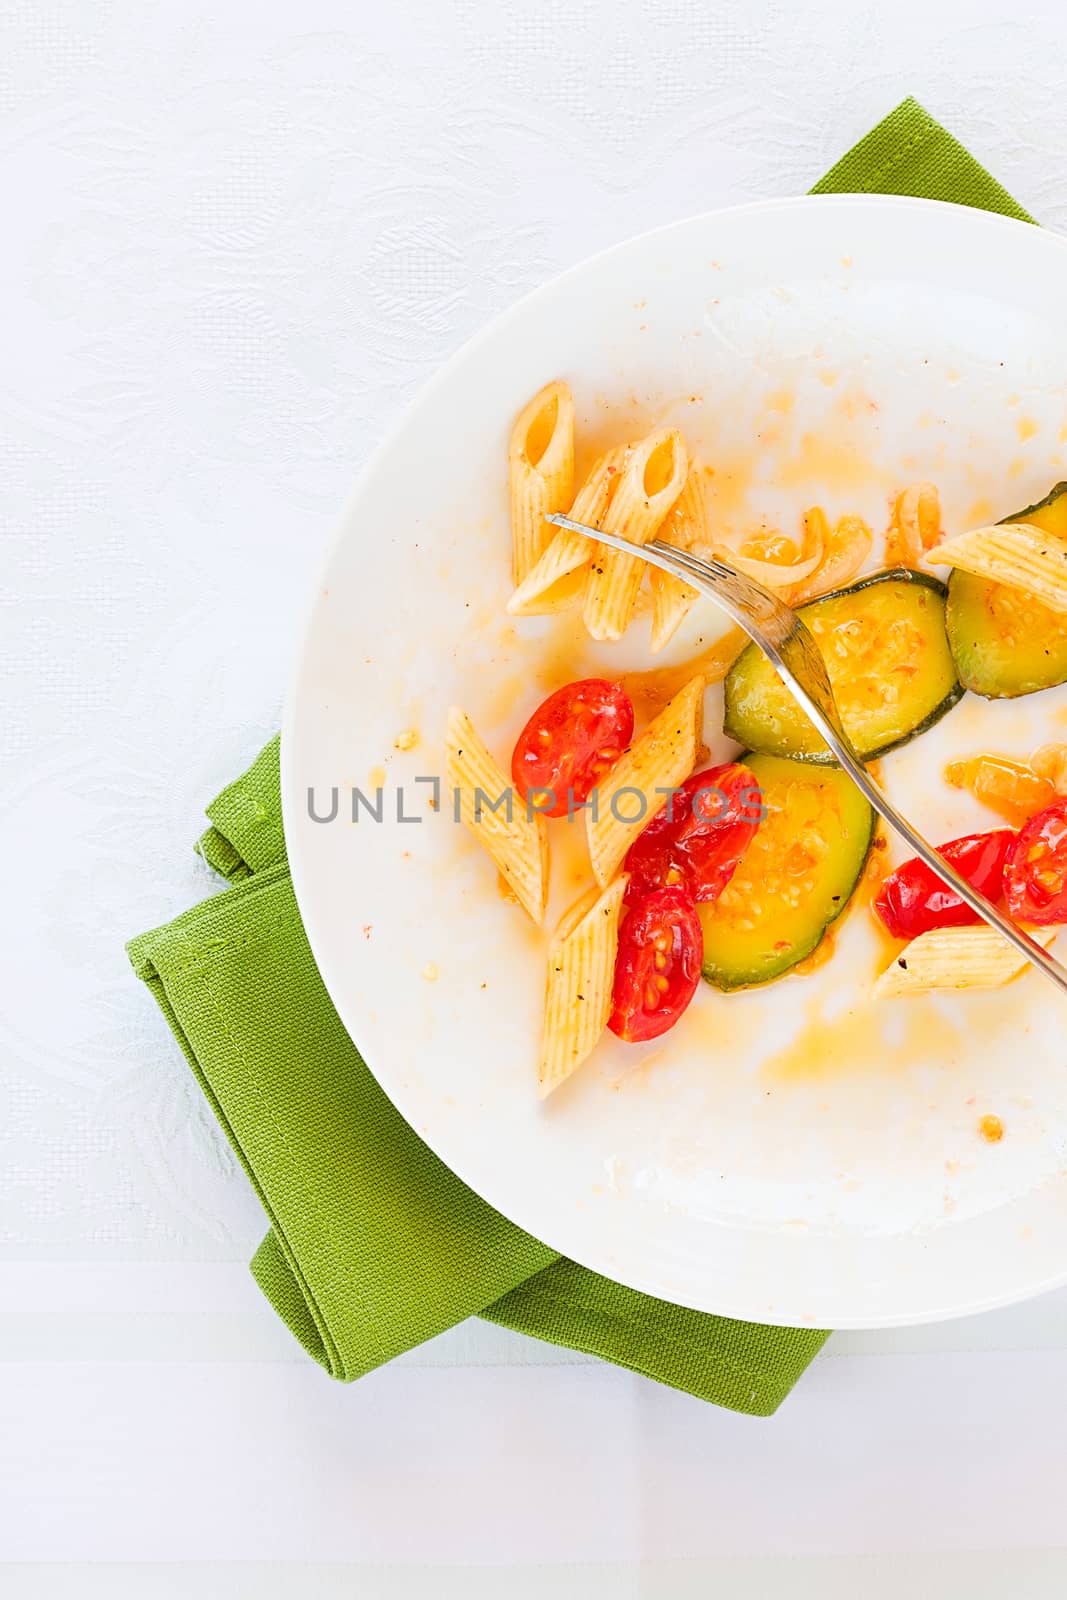 Traditional italian penne pasta with zucchini and cherry tomatoes already eaten seen from above